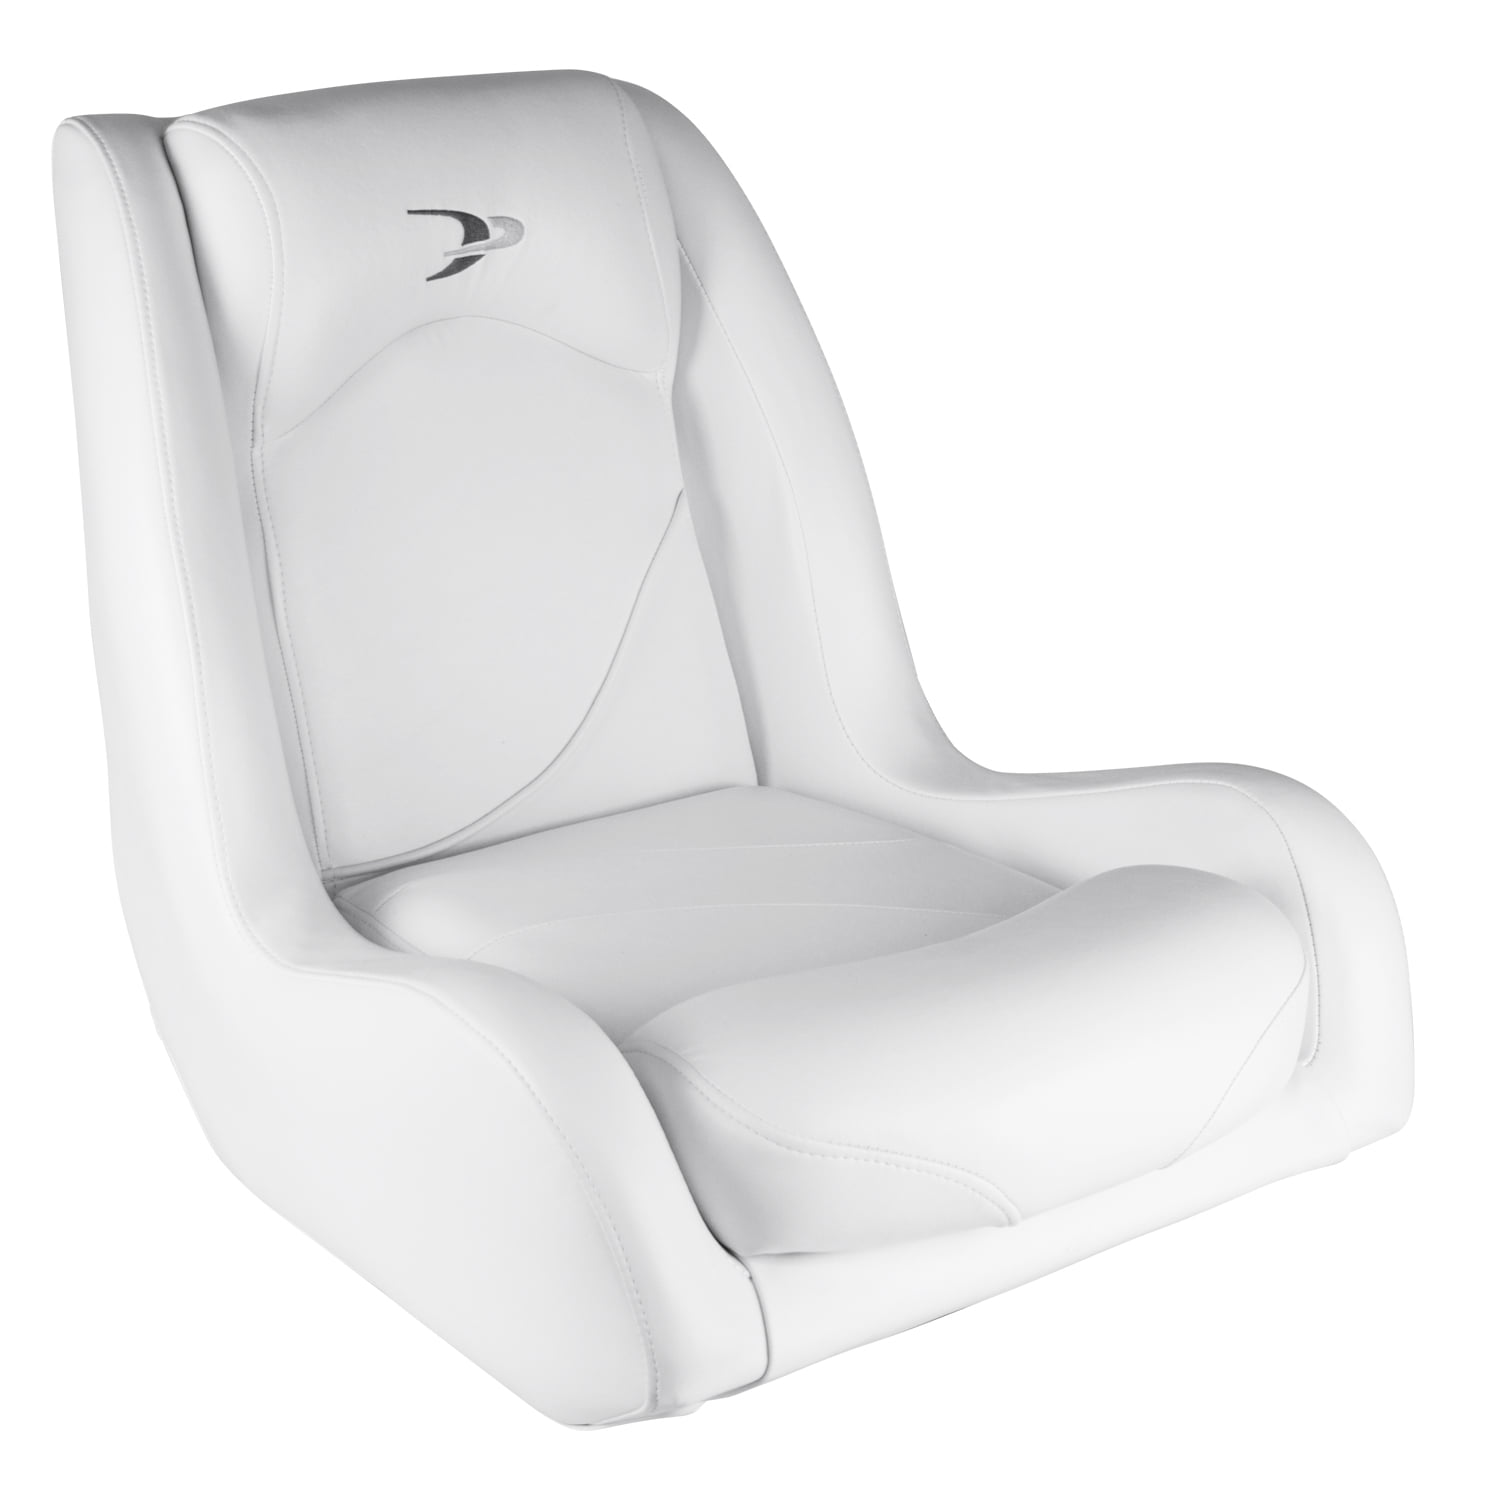 Wise Premium Deluxe Bucket Boat Seat White The Wise Company 8WD1127-0030